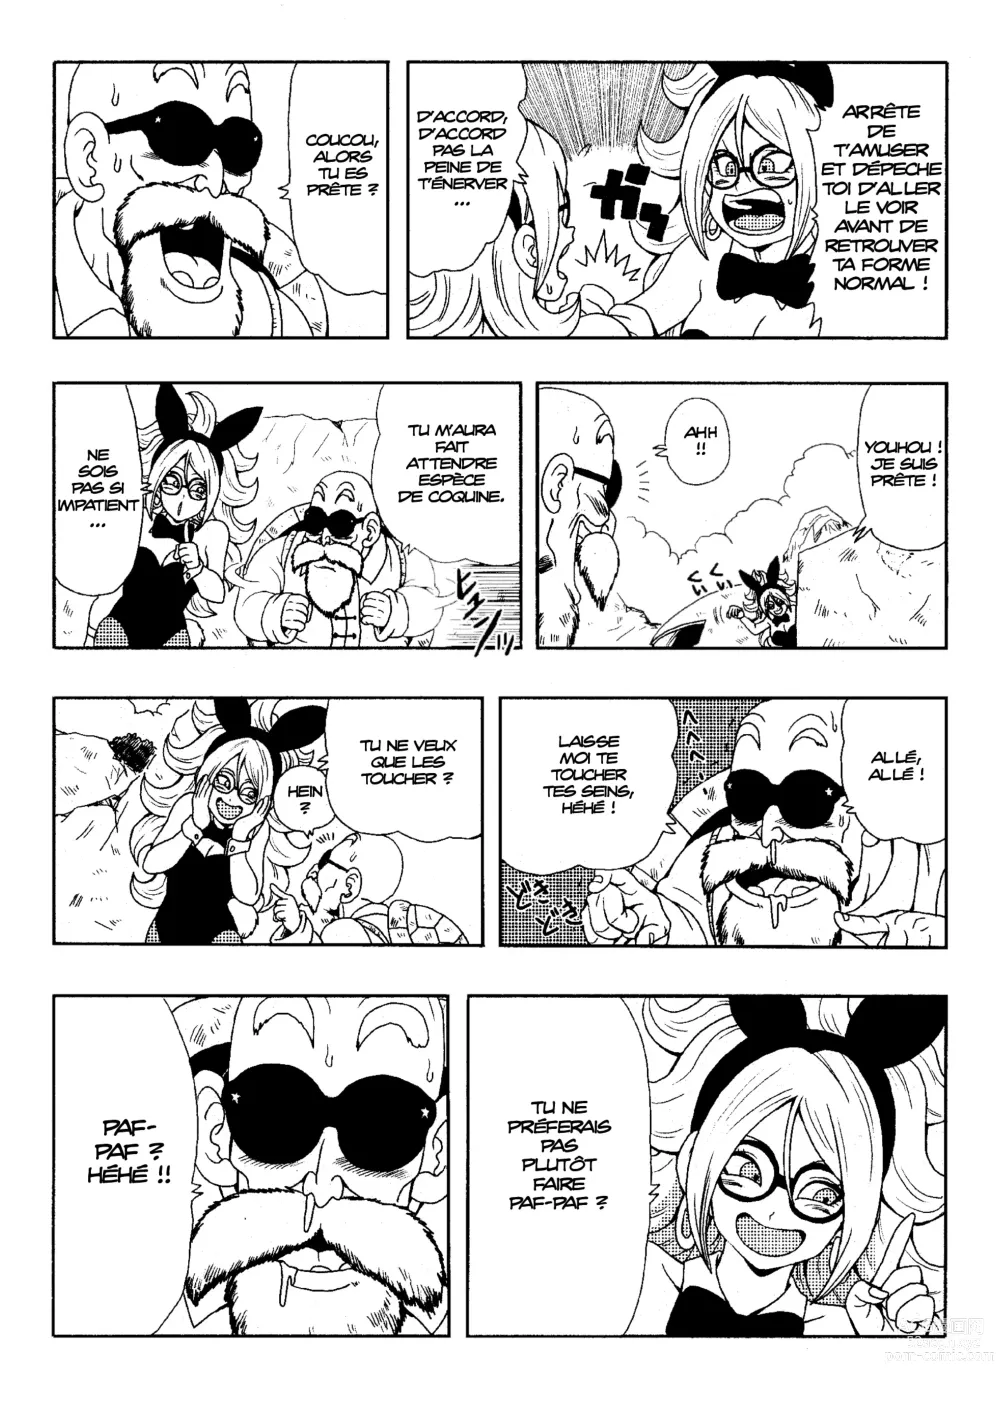 Page 32 of doujinshi Episode of Bulma - Android 21 Version